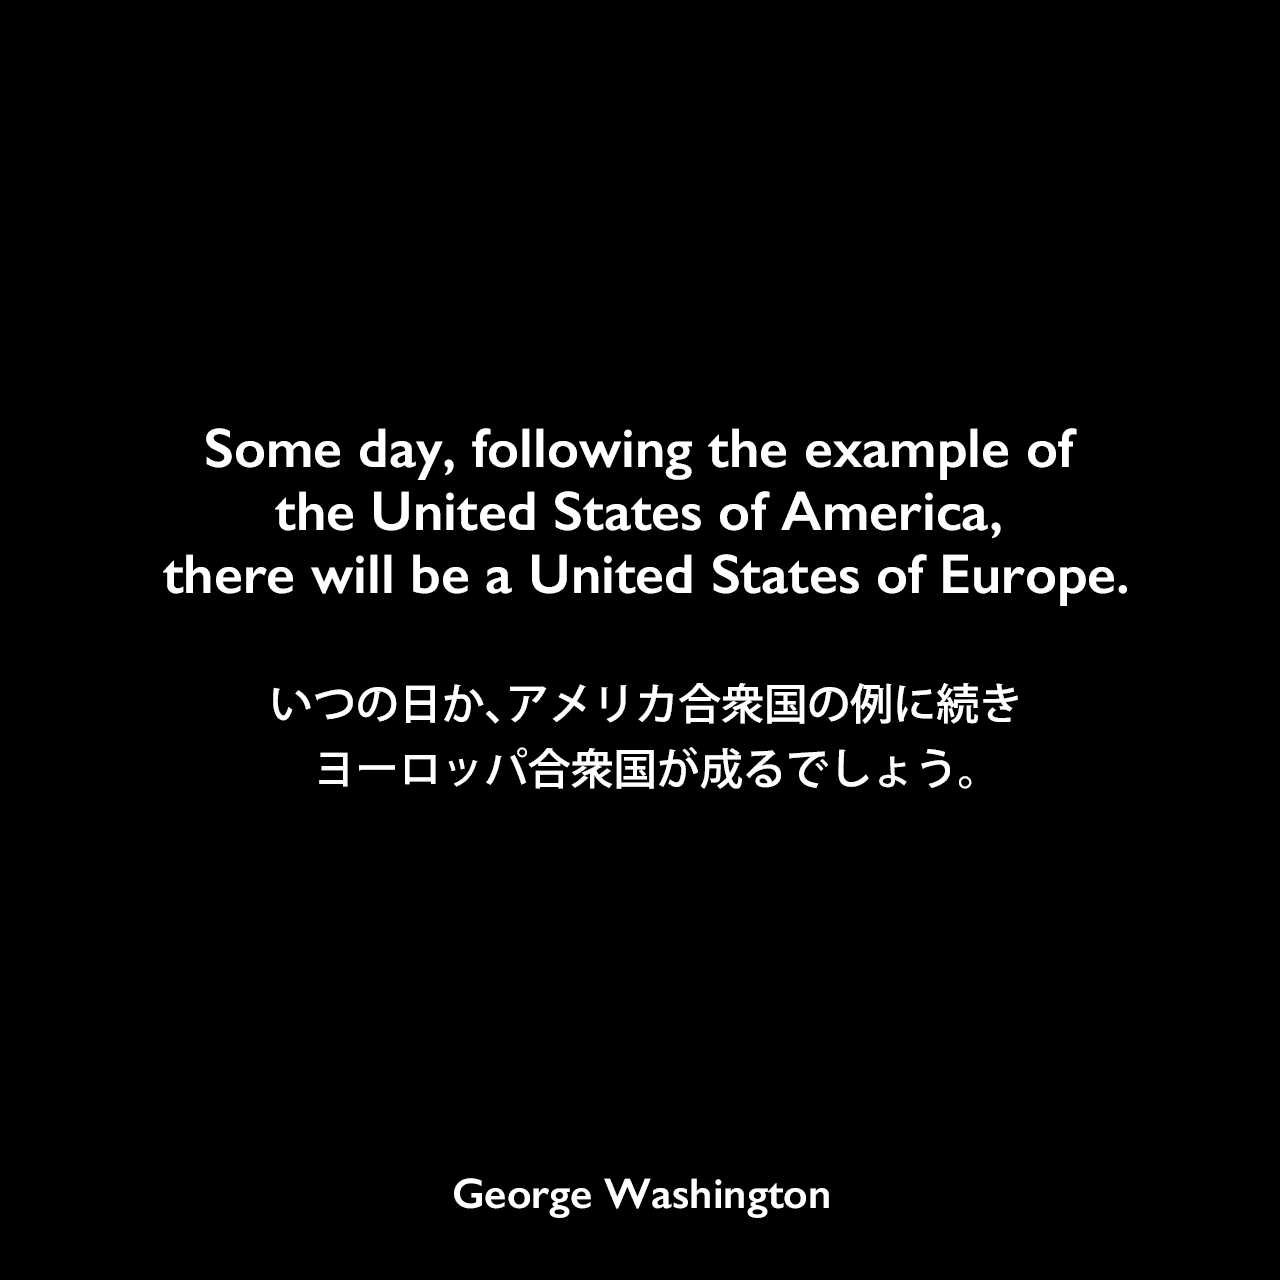 Some day, following the example of the United States of America, there will be a United States of Europe.いつの日か、アメリカ合衆国の例に続き、ヨーロッパ合衆国が成るでしょう。George Washington